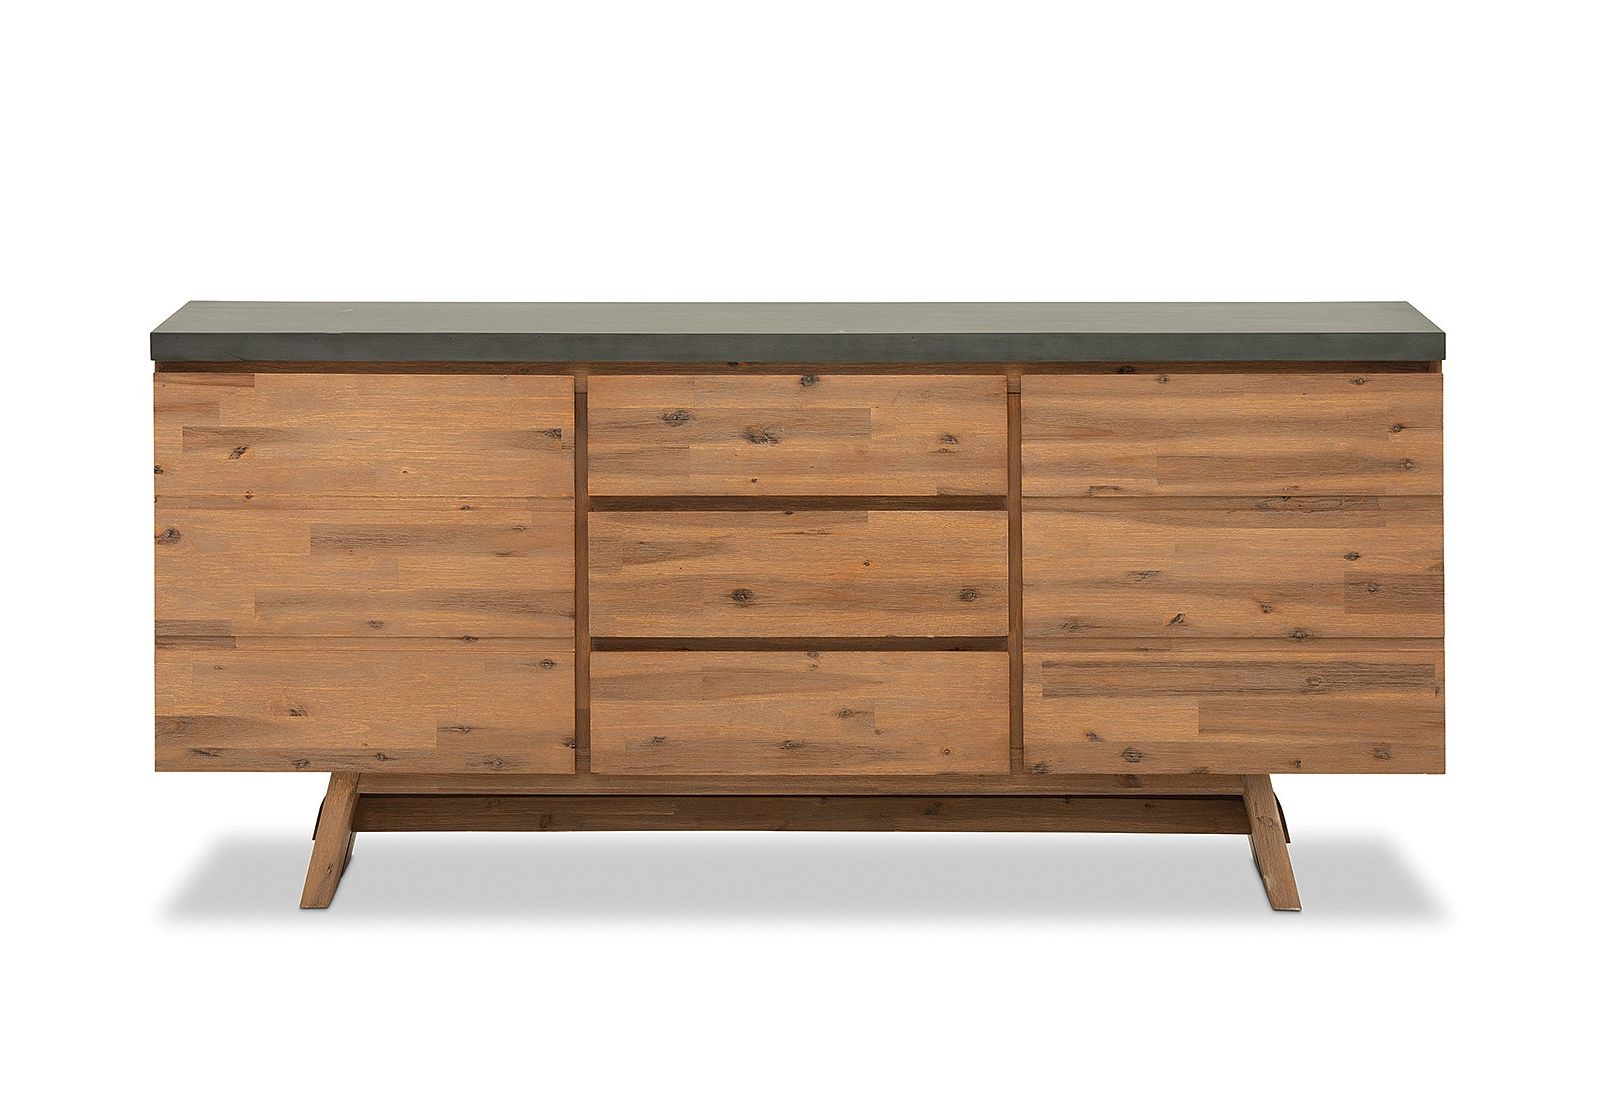 Buffet Tables & Sideboards | Amart Furniture For Serafino Media Credenzas (View 16 of 20)